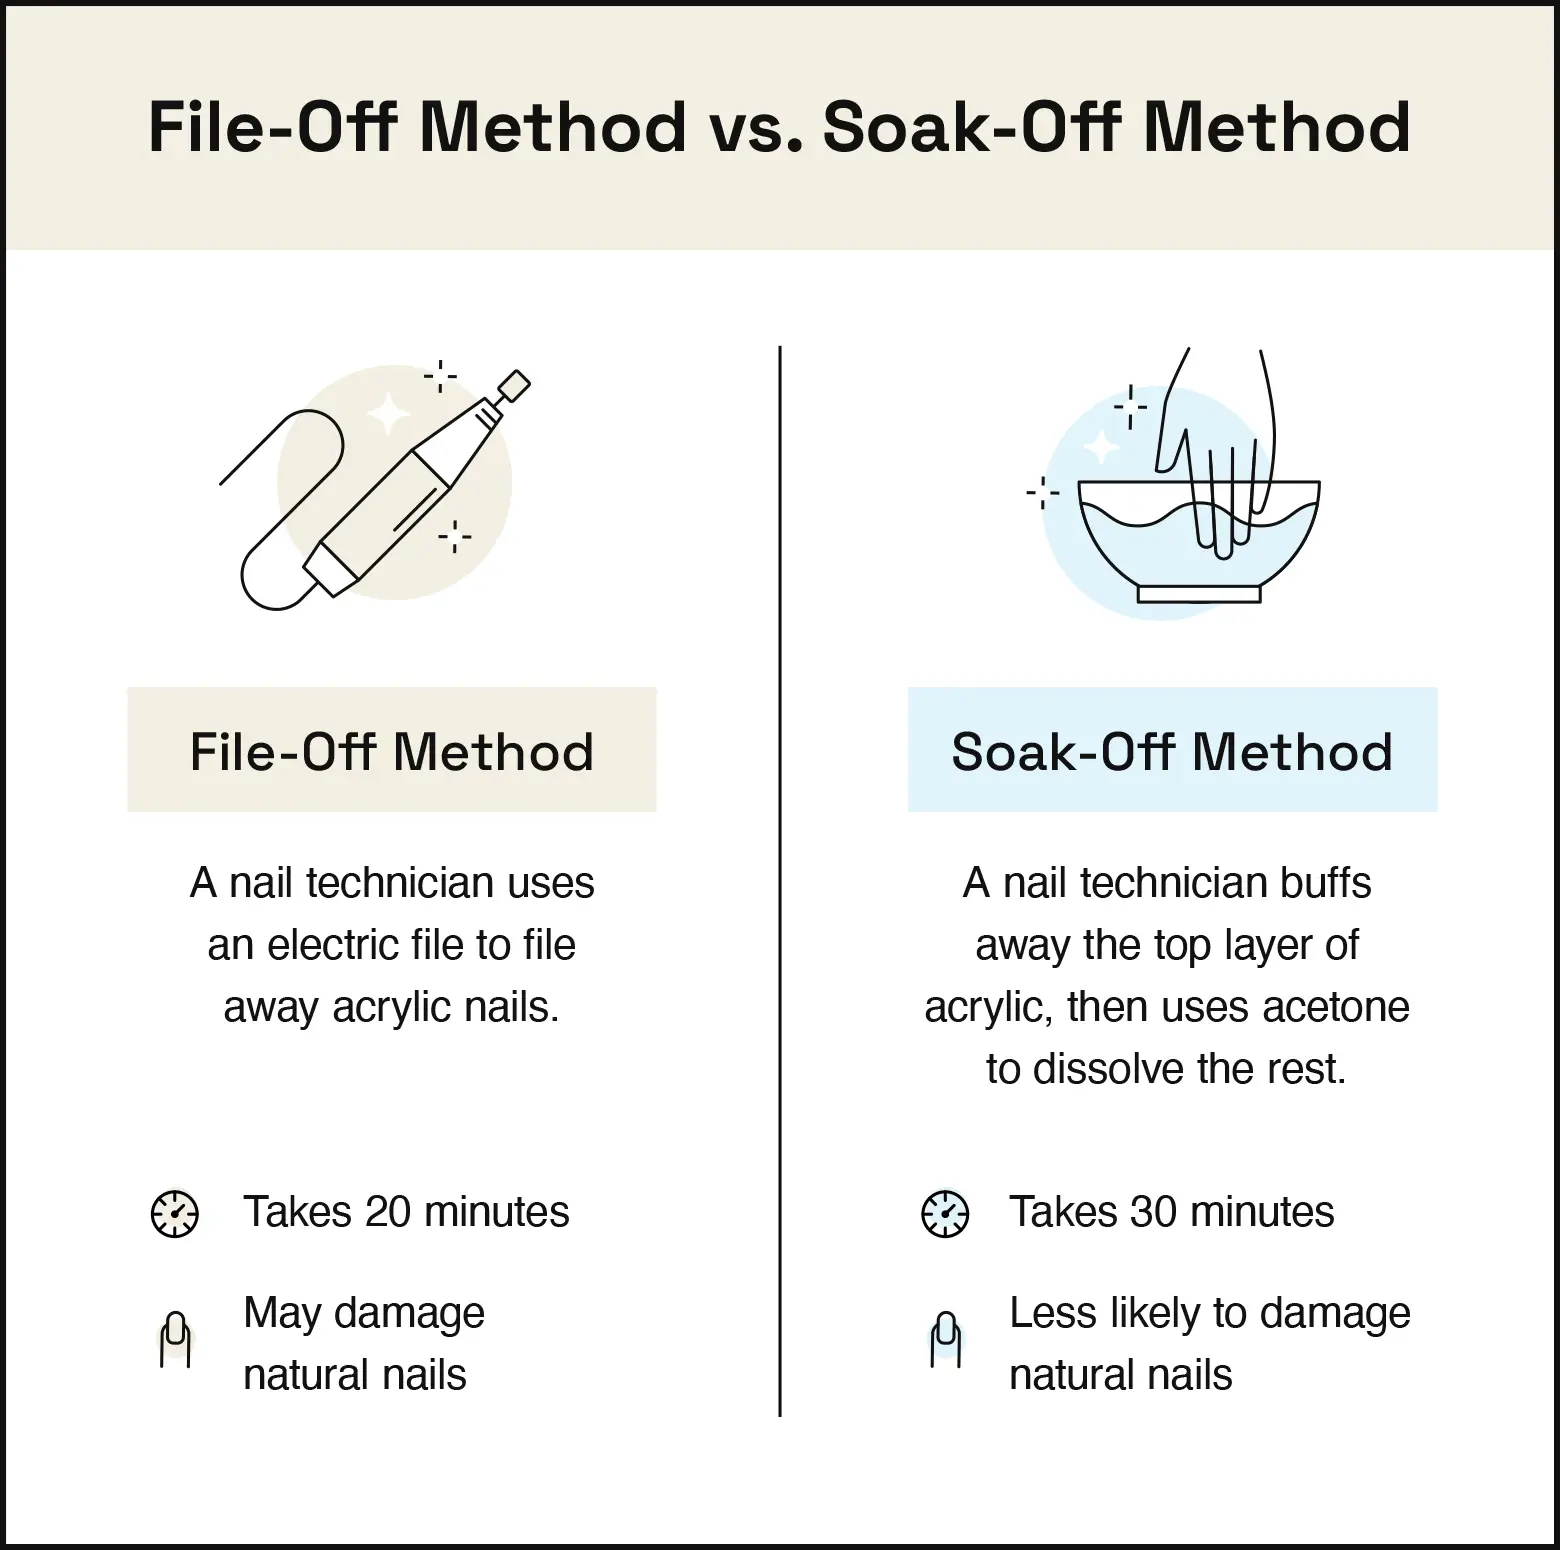 Image covers the difference between filing off and soaking off acrylic nails.